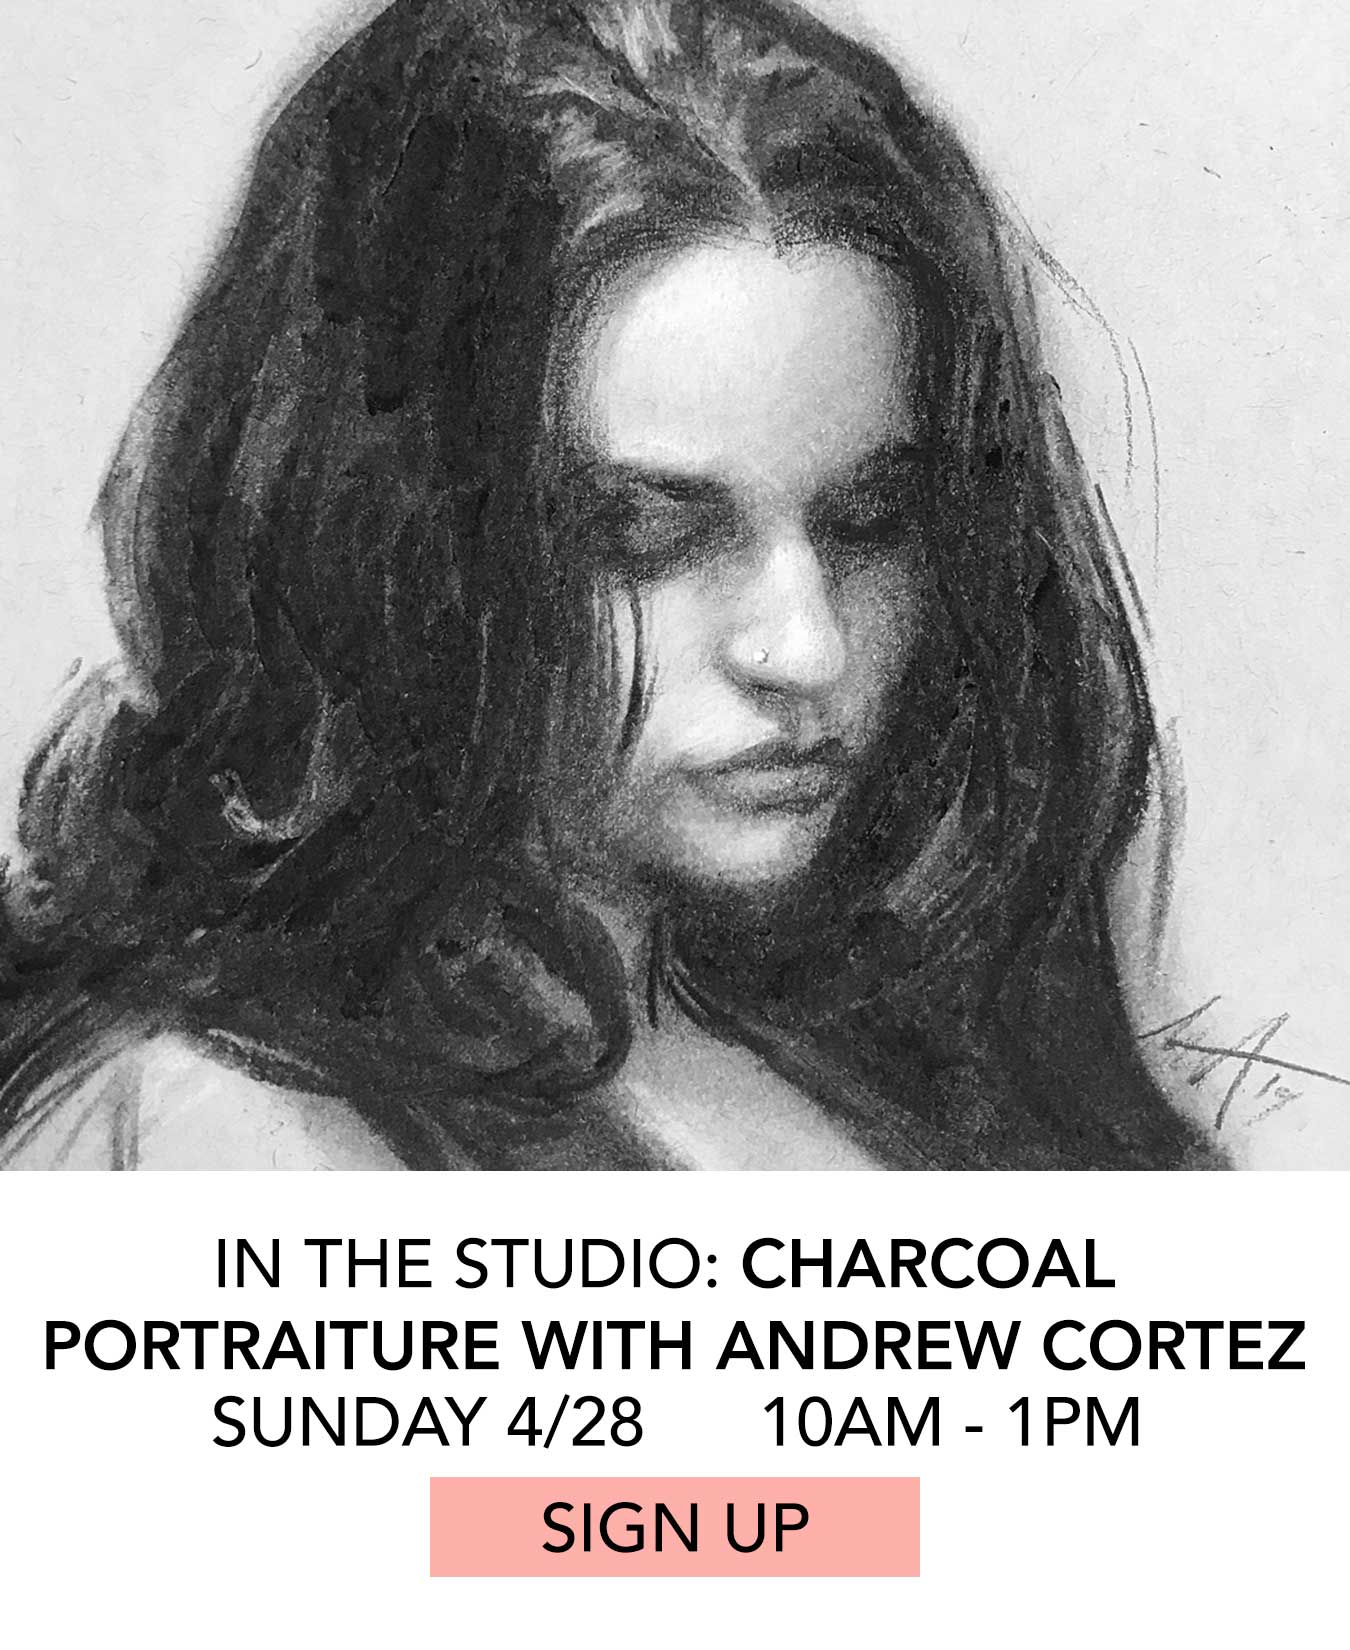 In the Studio: Charcoal Portraiture with Andrew Cortez. Sunday 4/28 from 10:00am to 1:00pm. Click to Sign Up.